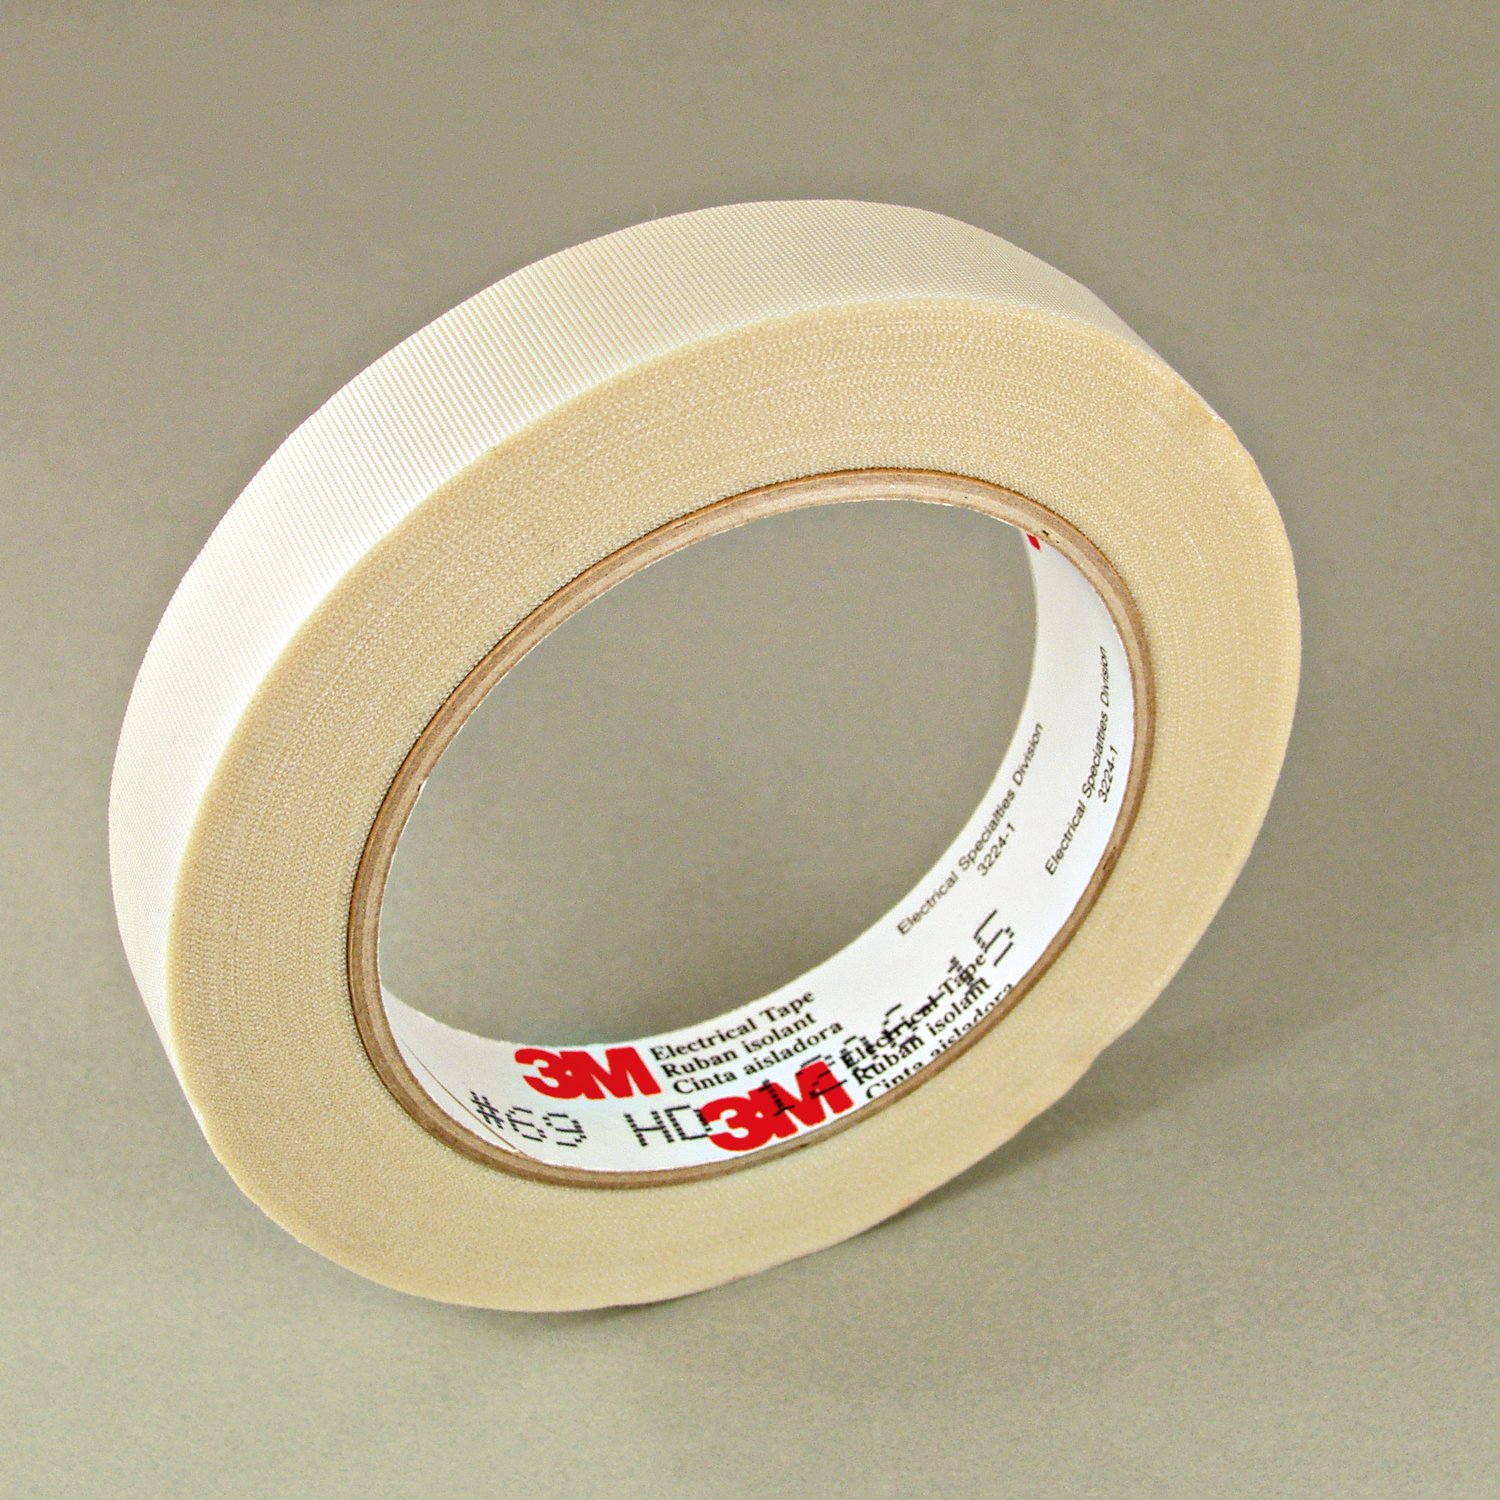 3/4" 3M 69 Glass Cloth Electrical Tape (3M69) with Silicone Adhesive 180°C, white, 3/4" wide x  36 YD roll